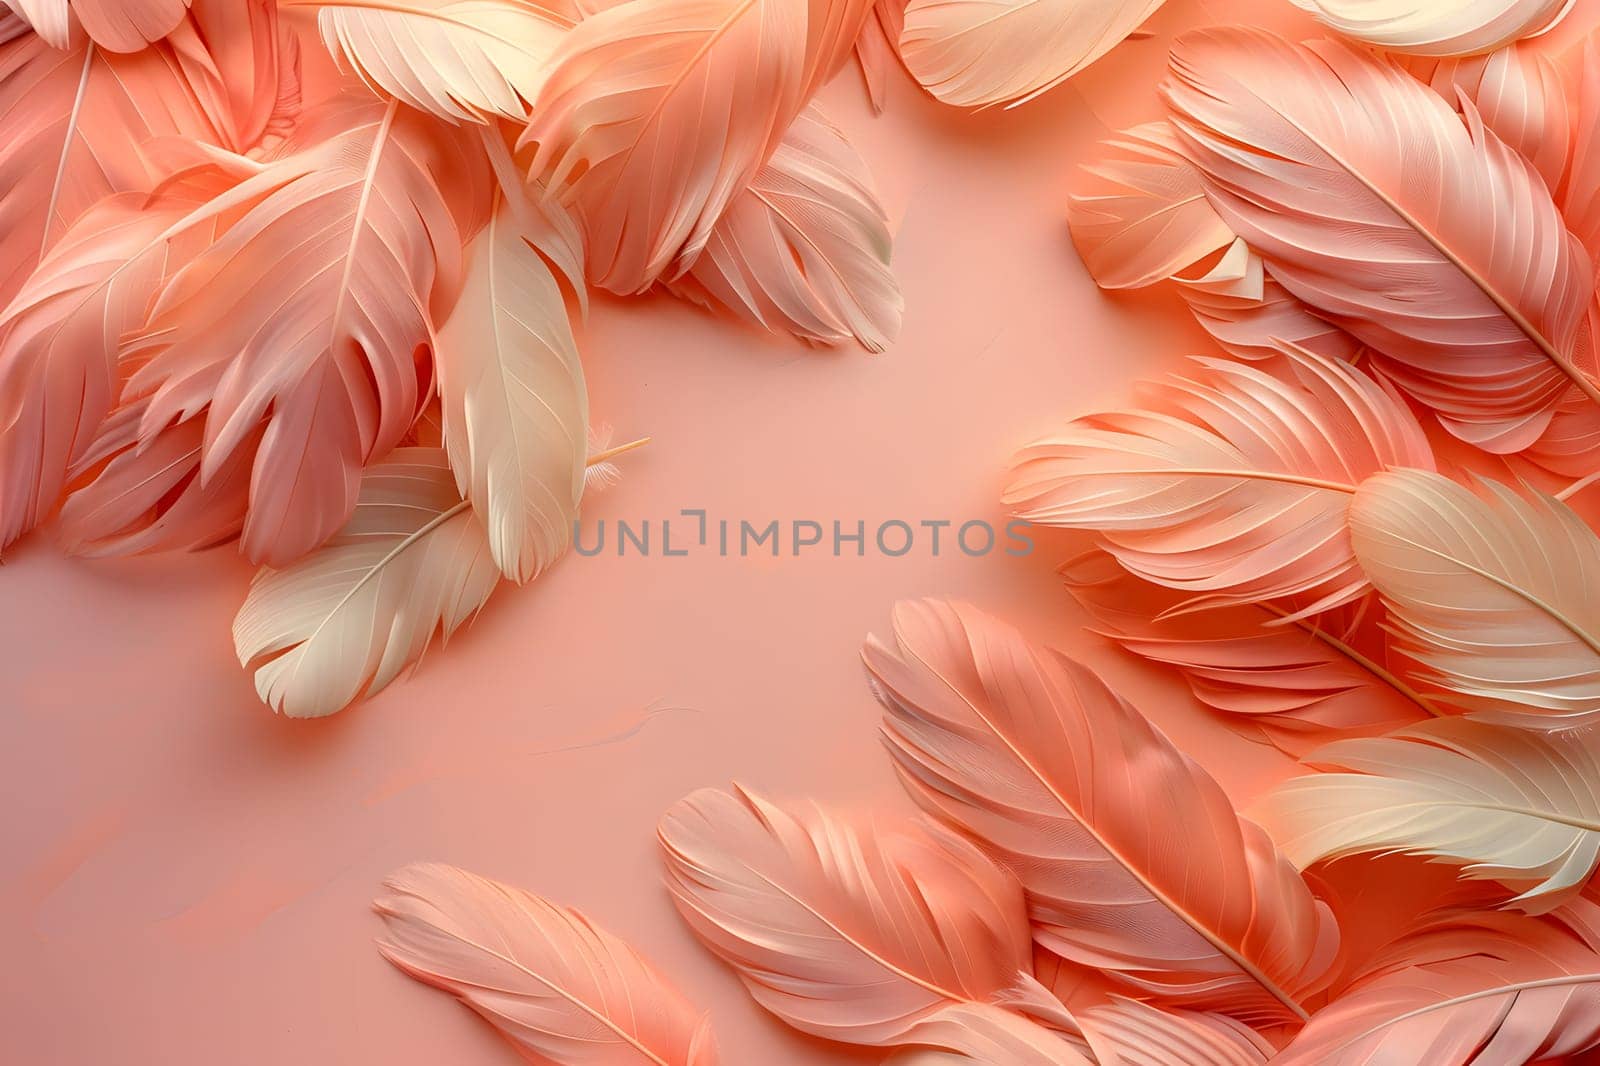 Soft pink feathers on a matching background, reminiscent of peach petals by Nadtochiy